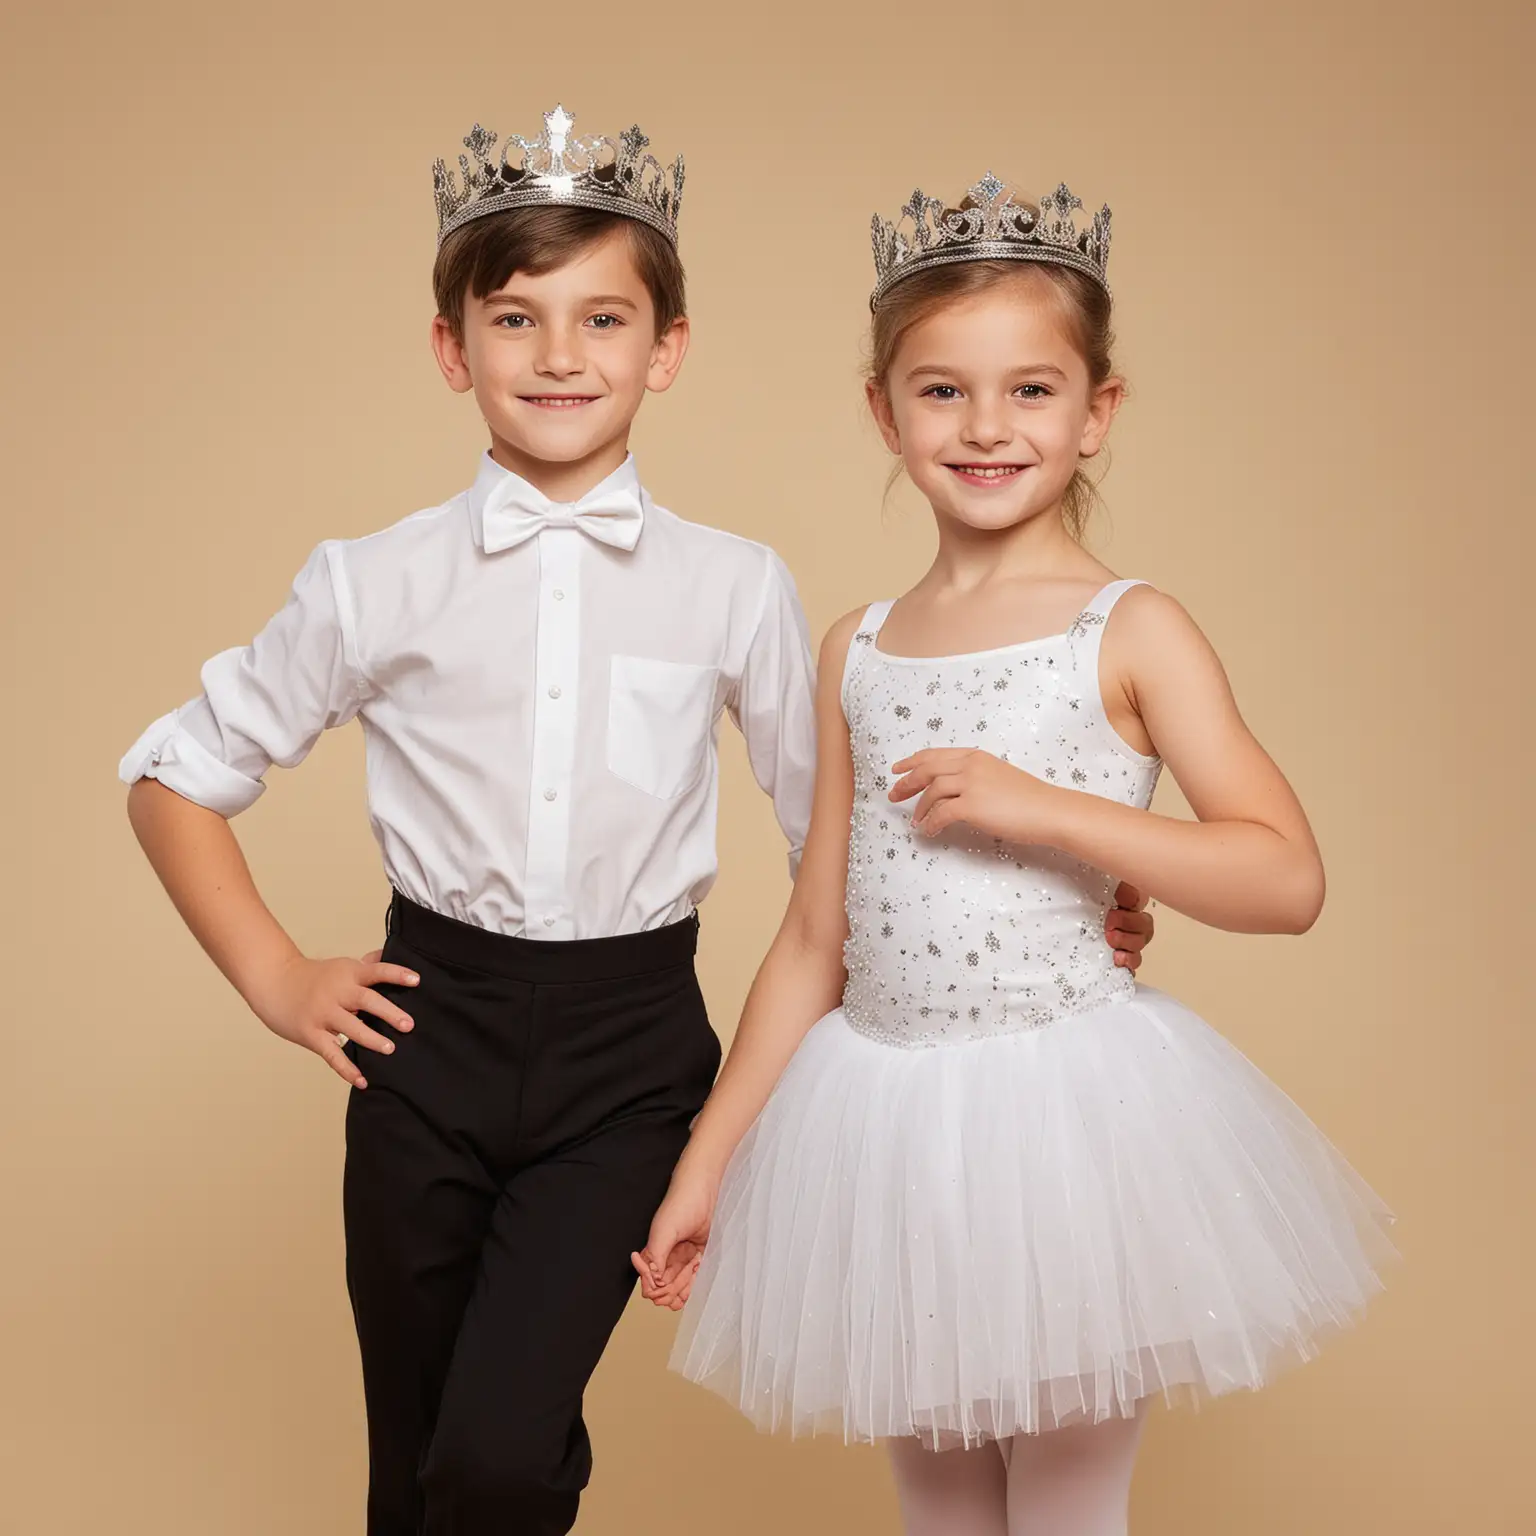 Whimsical Ballet and Tap Dance Camp Happy Kids in Costume